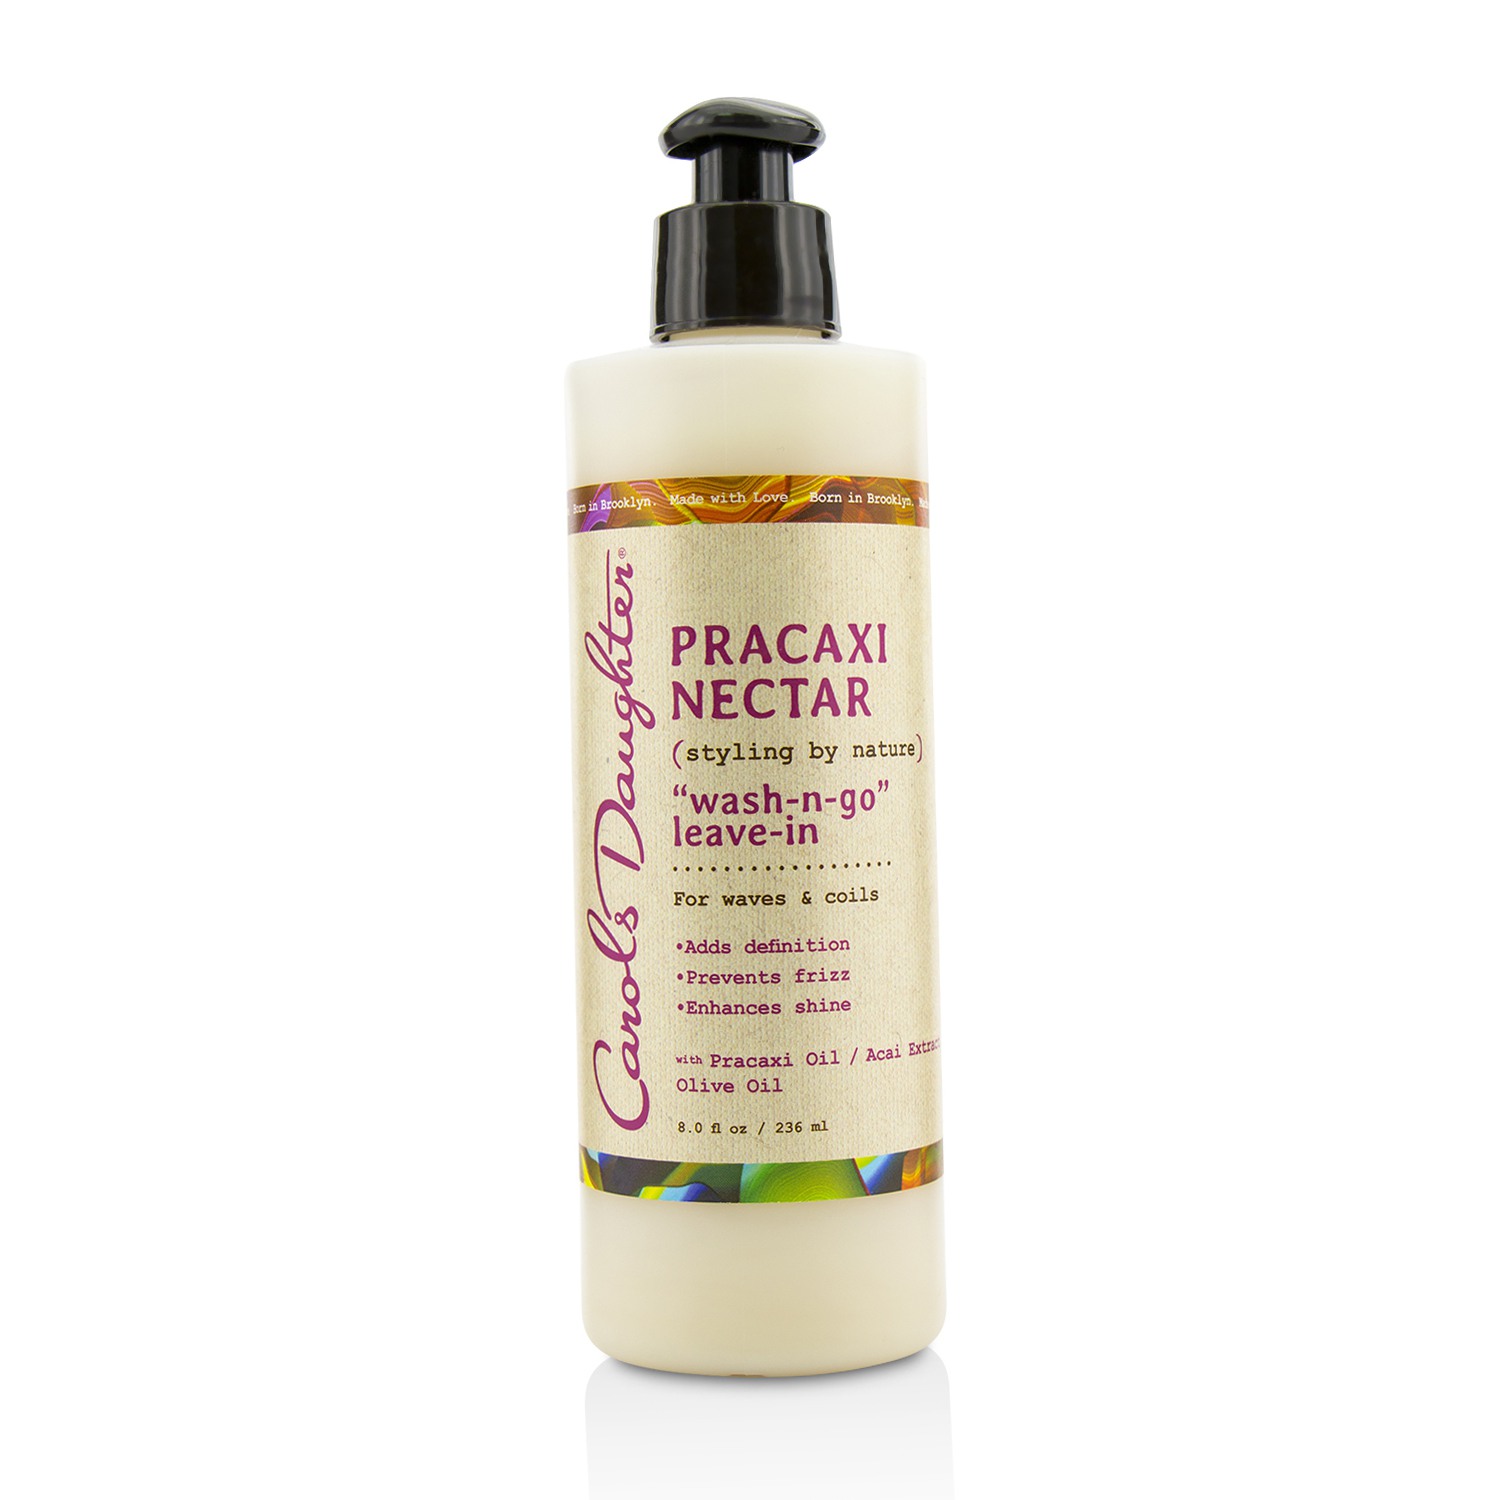 Pracaxi Nectar Wash-n-Go Leave-In (For Waves & Coils) Carols Daughter Image